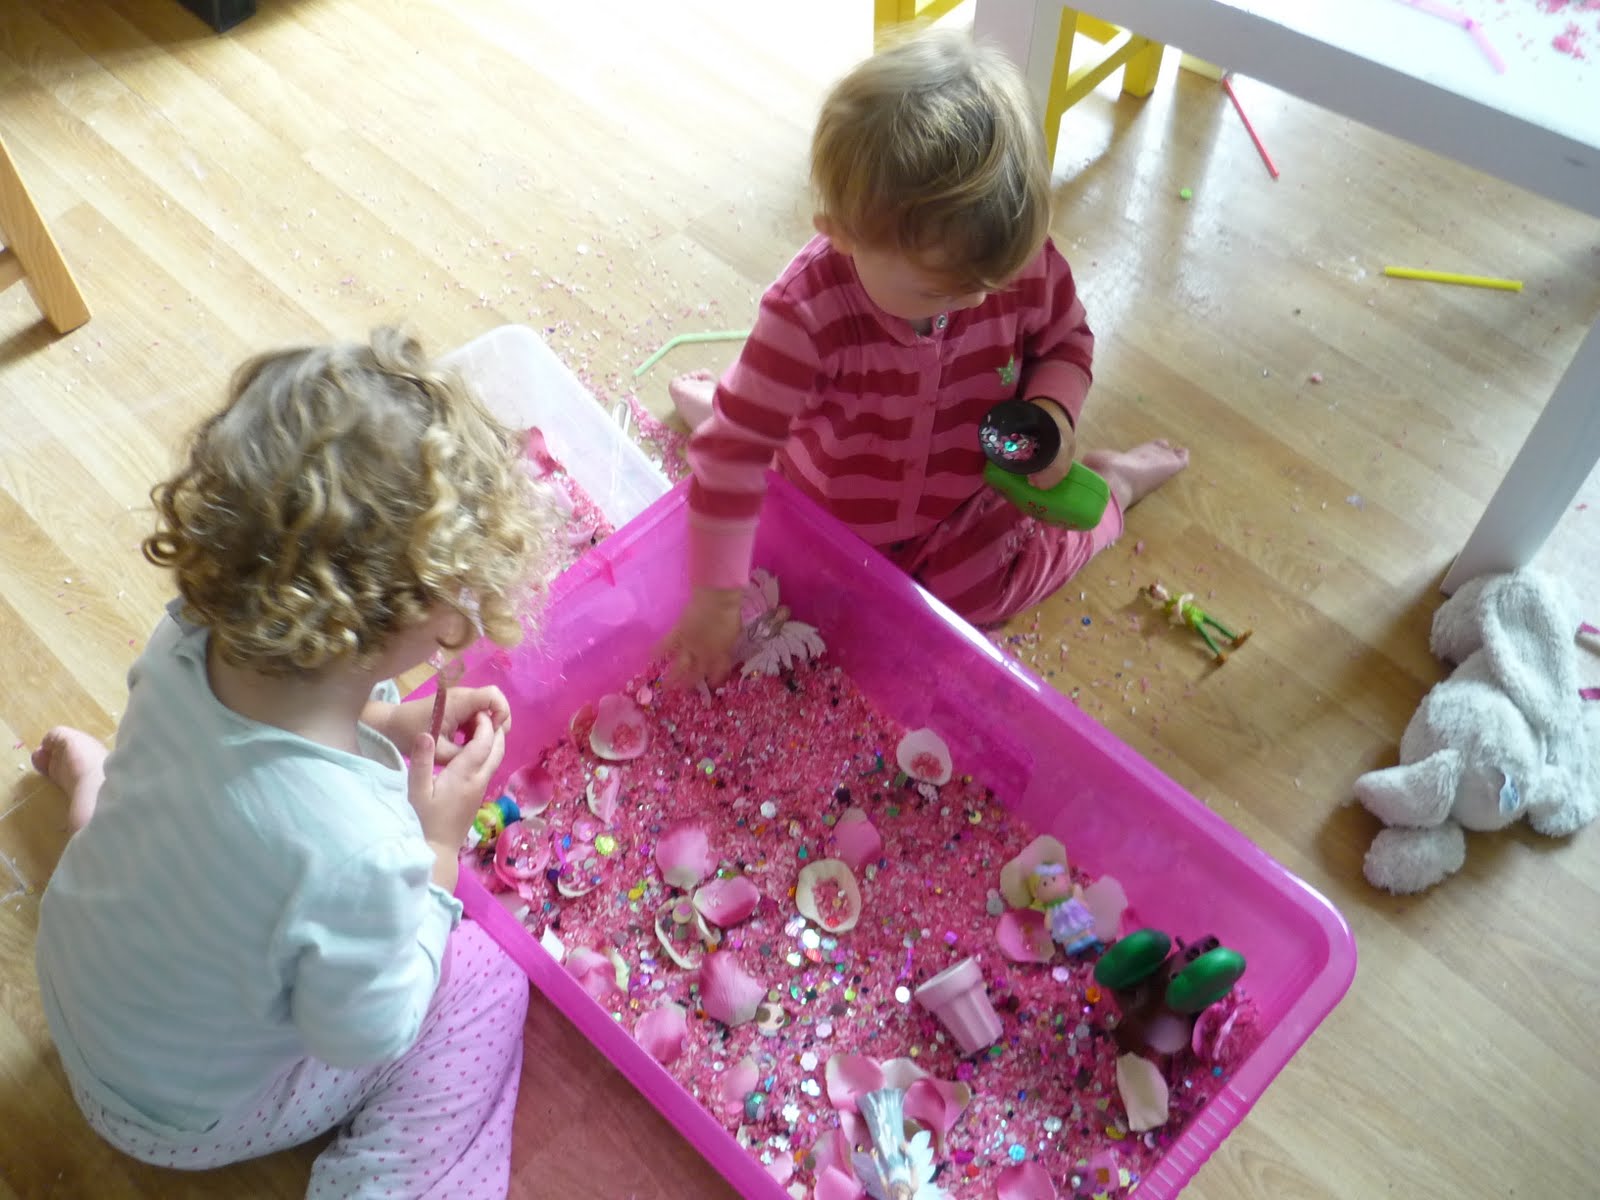 Children playing with a sensory tub